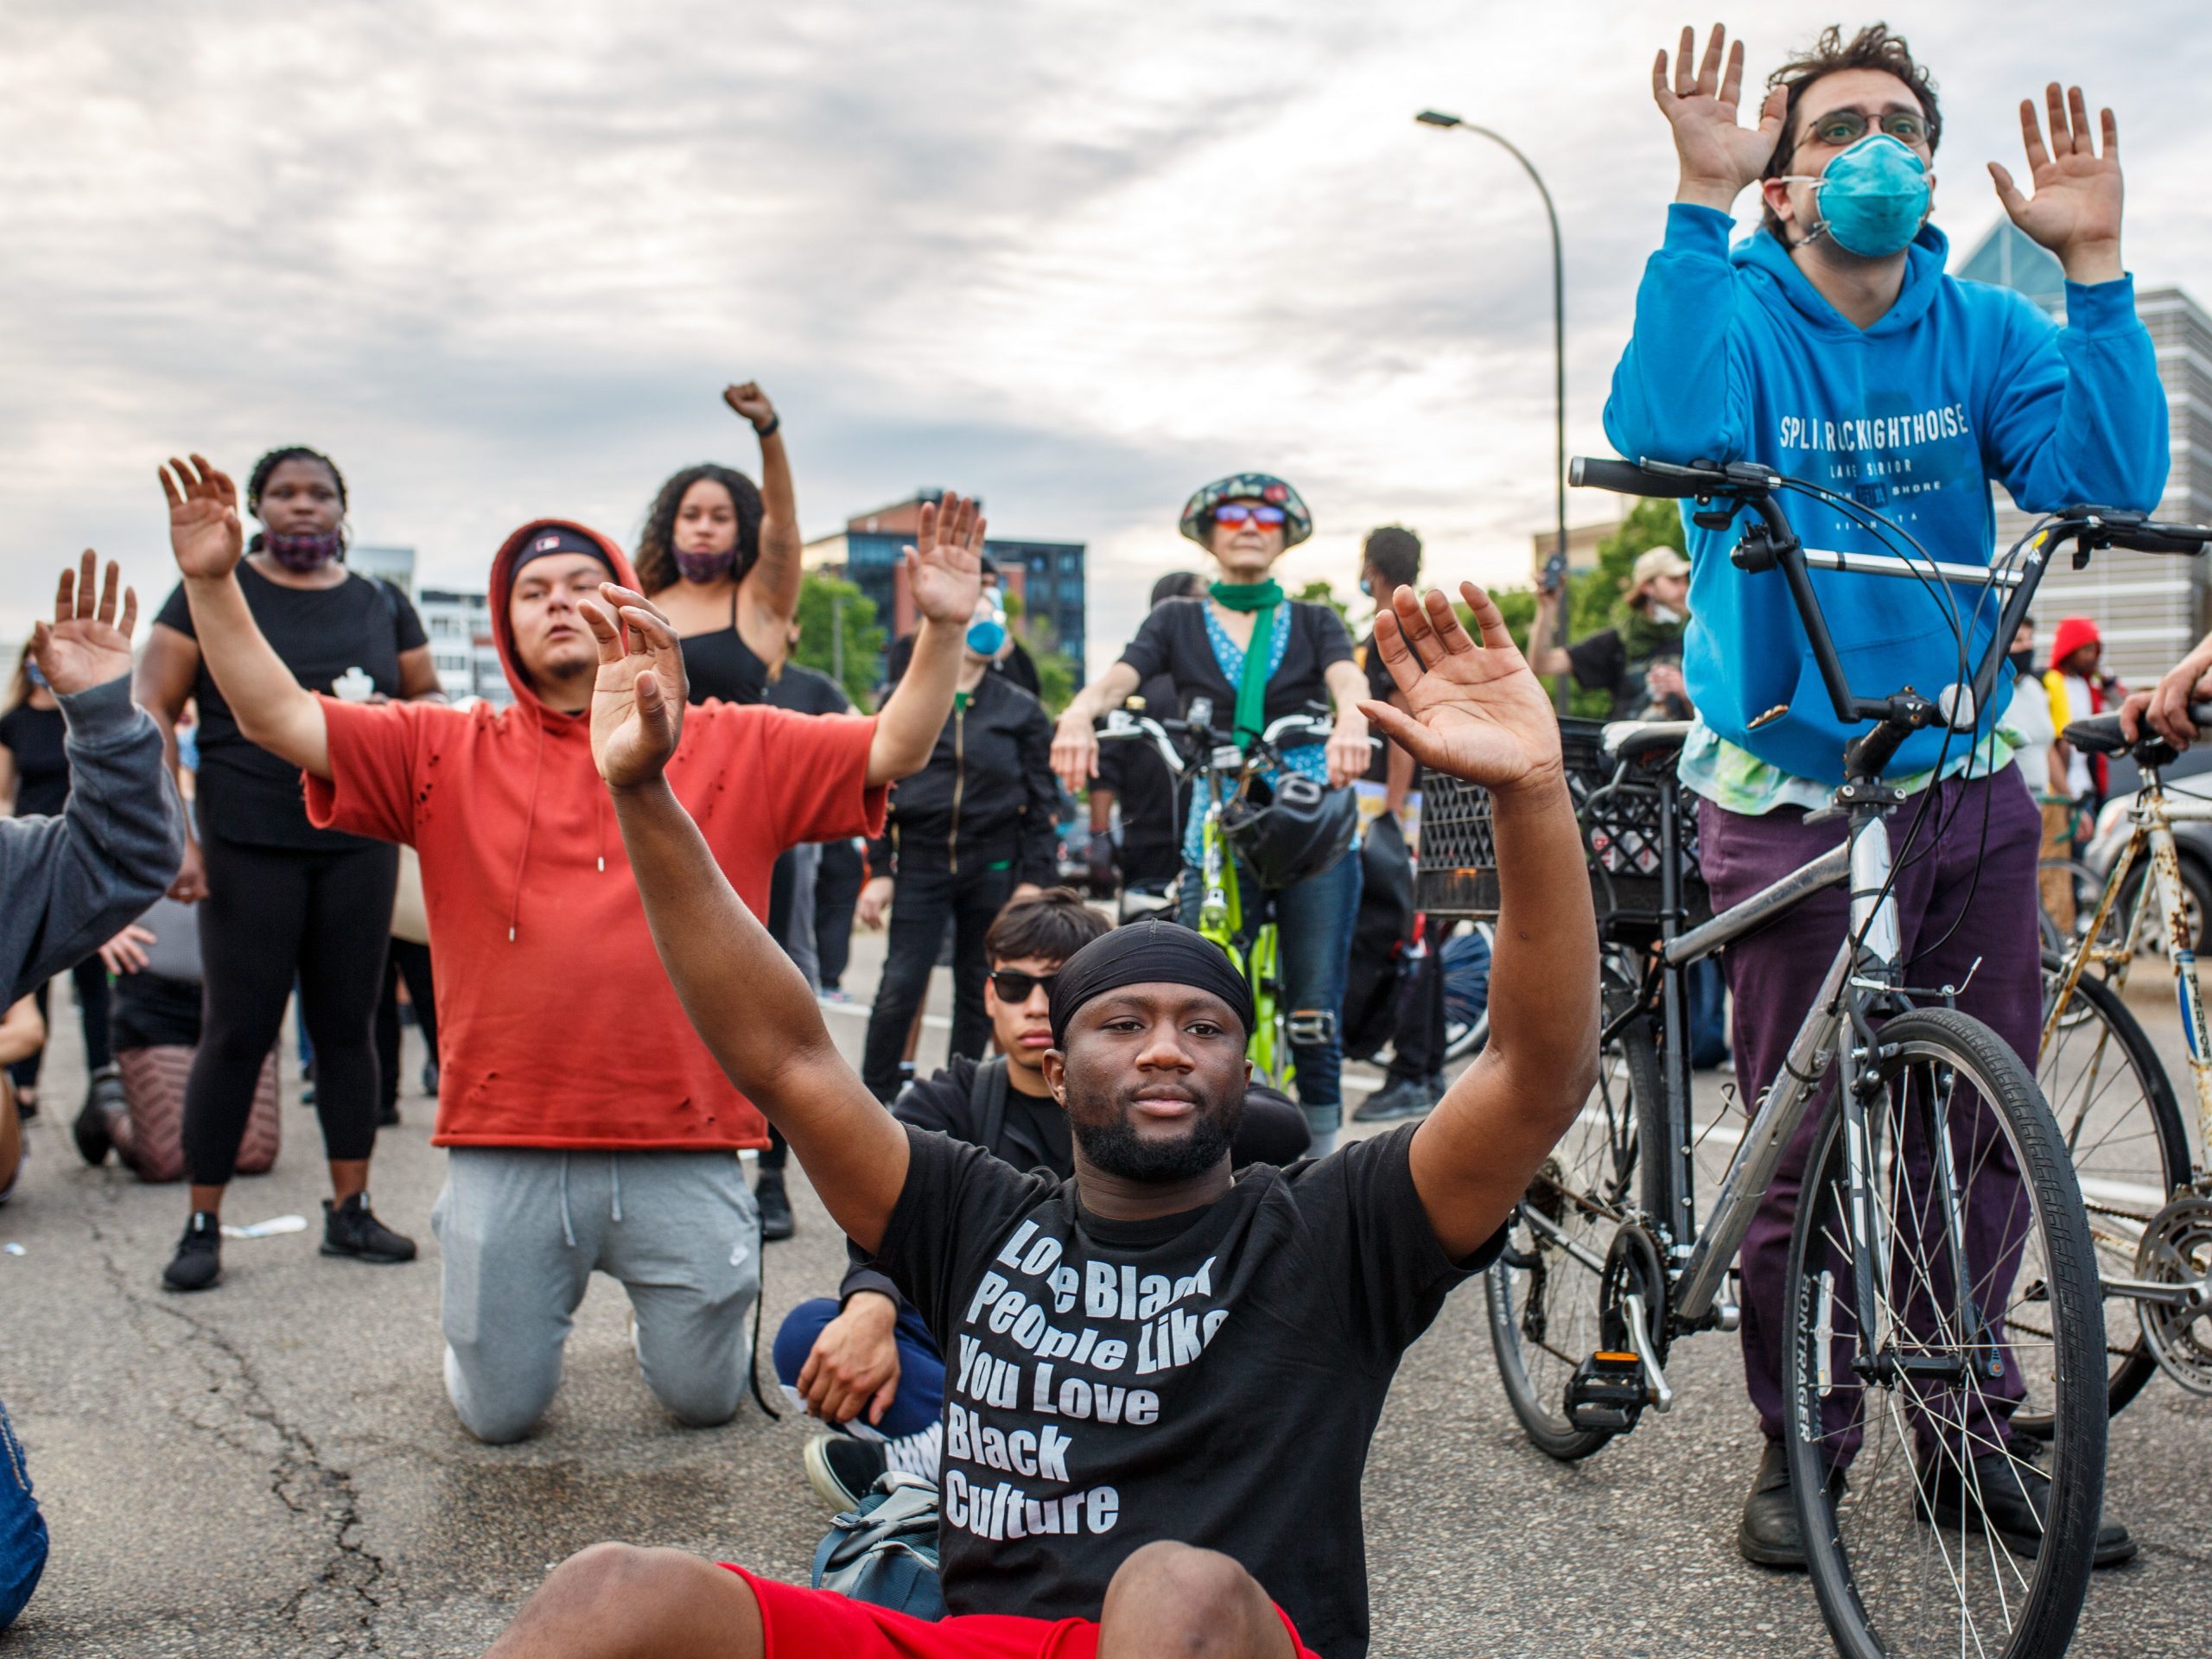 Demonstrators kneel and raise their hands during a protest in Minneapolis on Sunday.